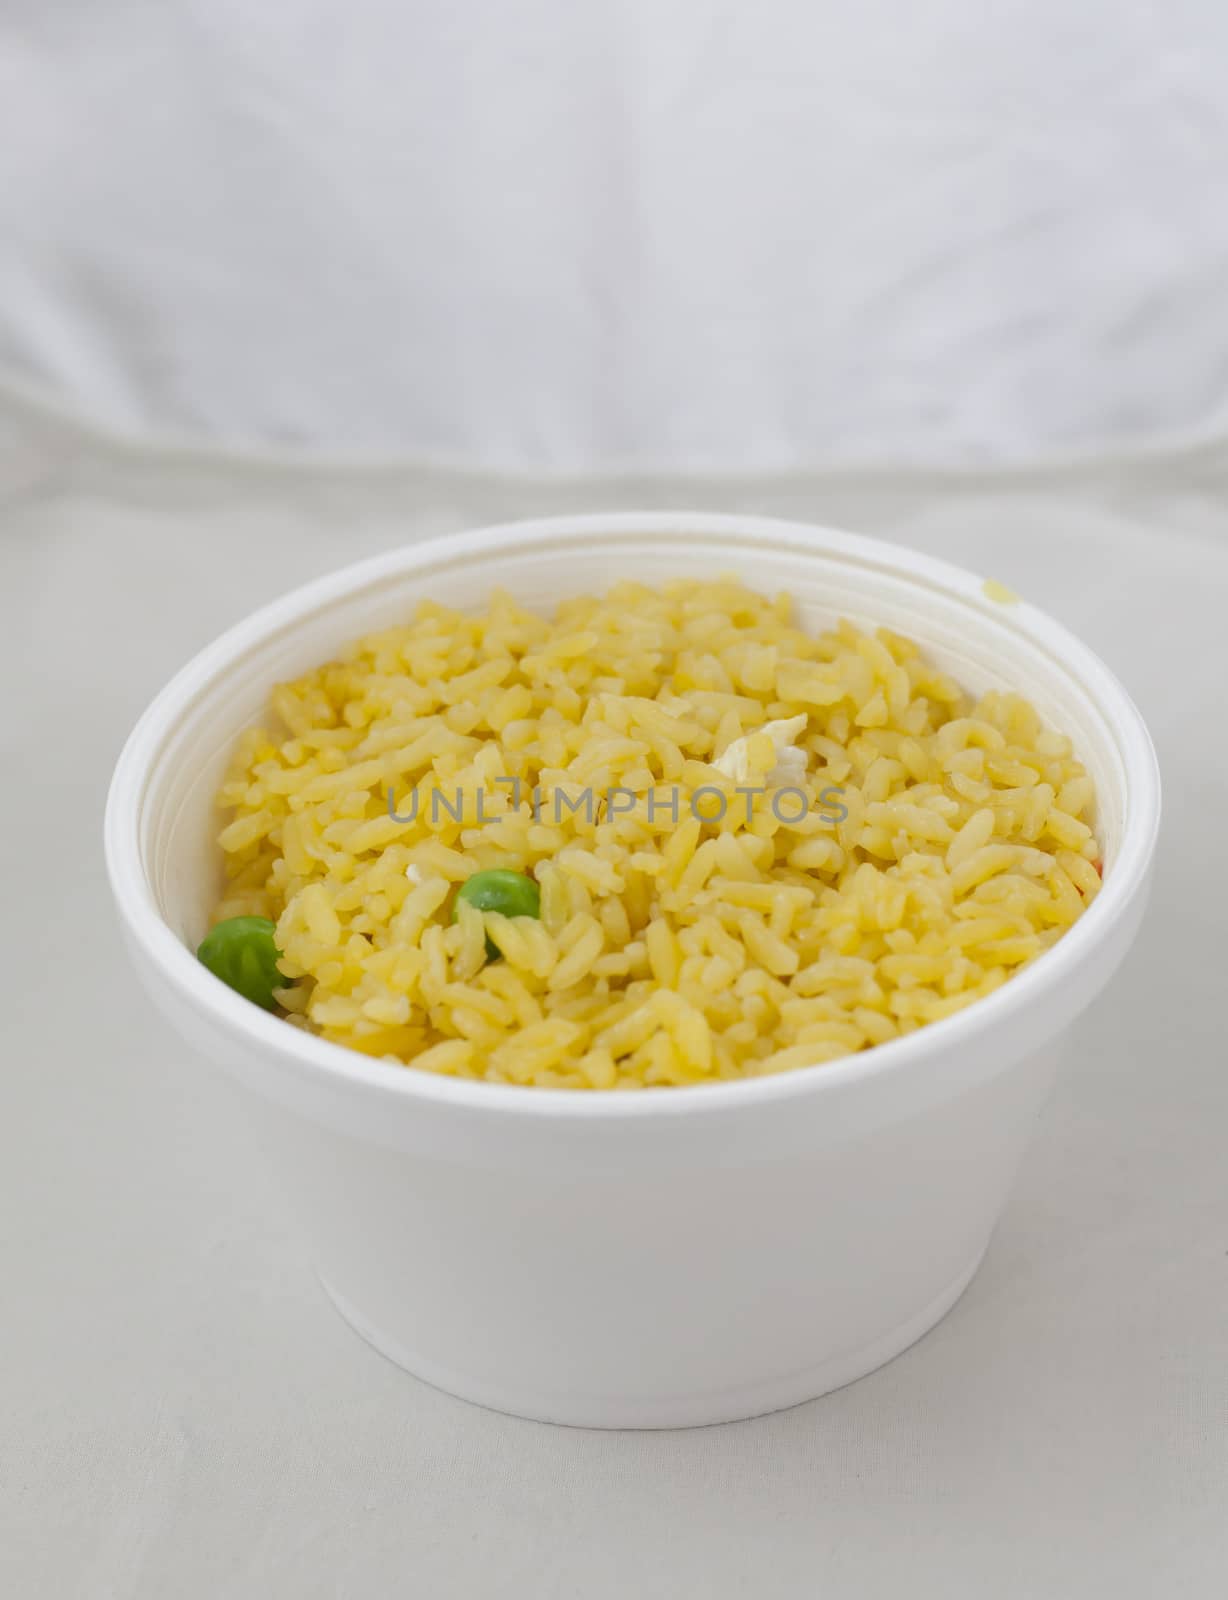 Takeout cup of fried rice